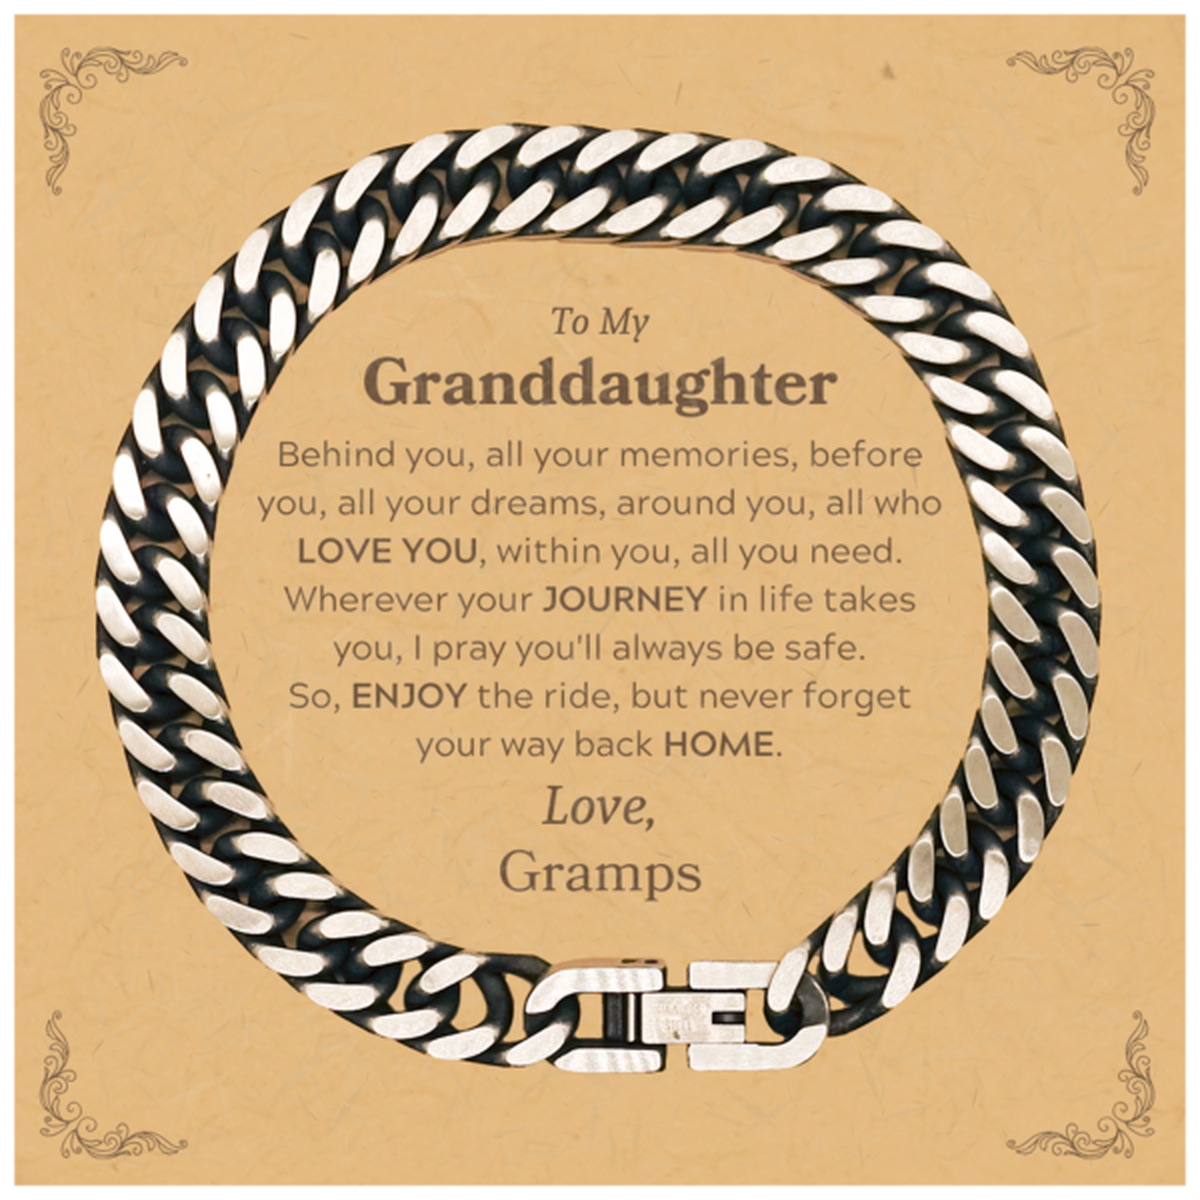 To My Granddaughter Graduation Gifts from Gramps, Granddaughter Cuban Link Chain Bracelet Christmas Birthday Gifts for Granddaughter Behind you, all your memories, before you, all your dreams. Love, Gramps